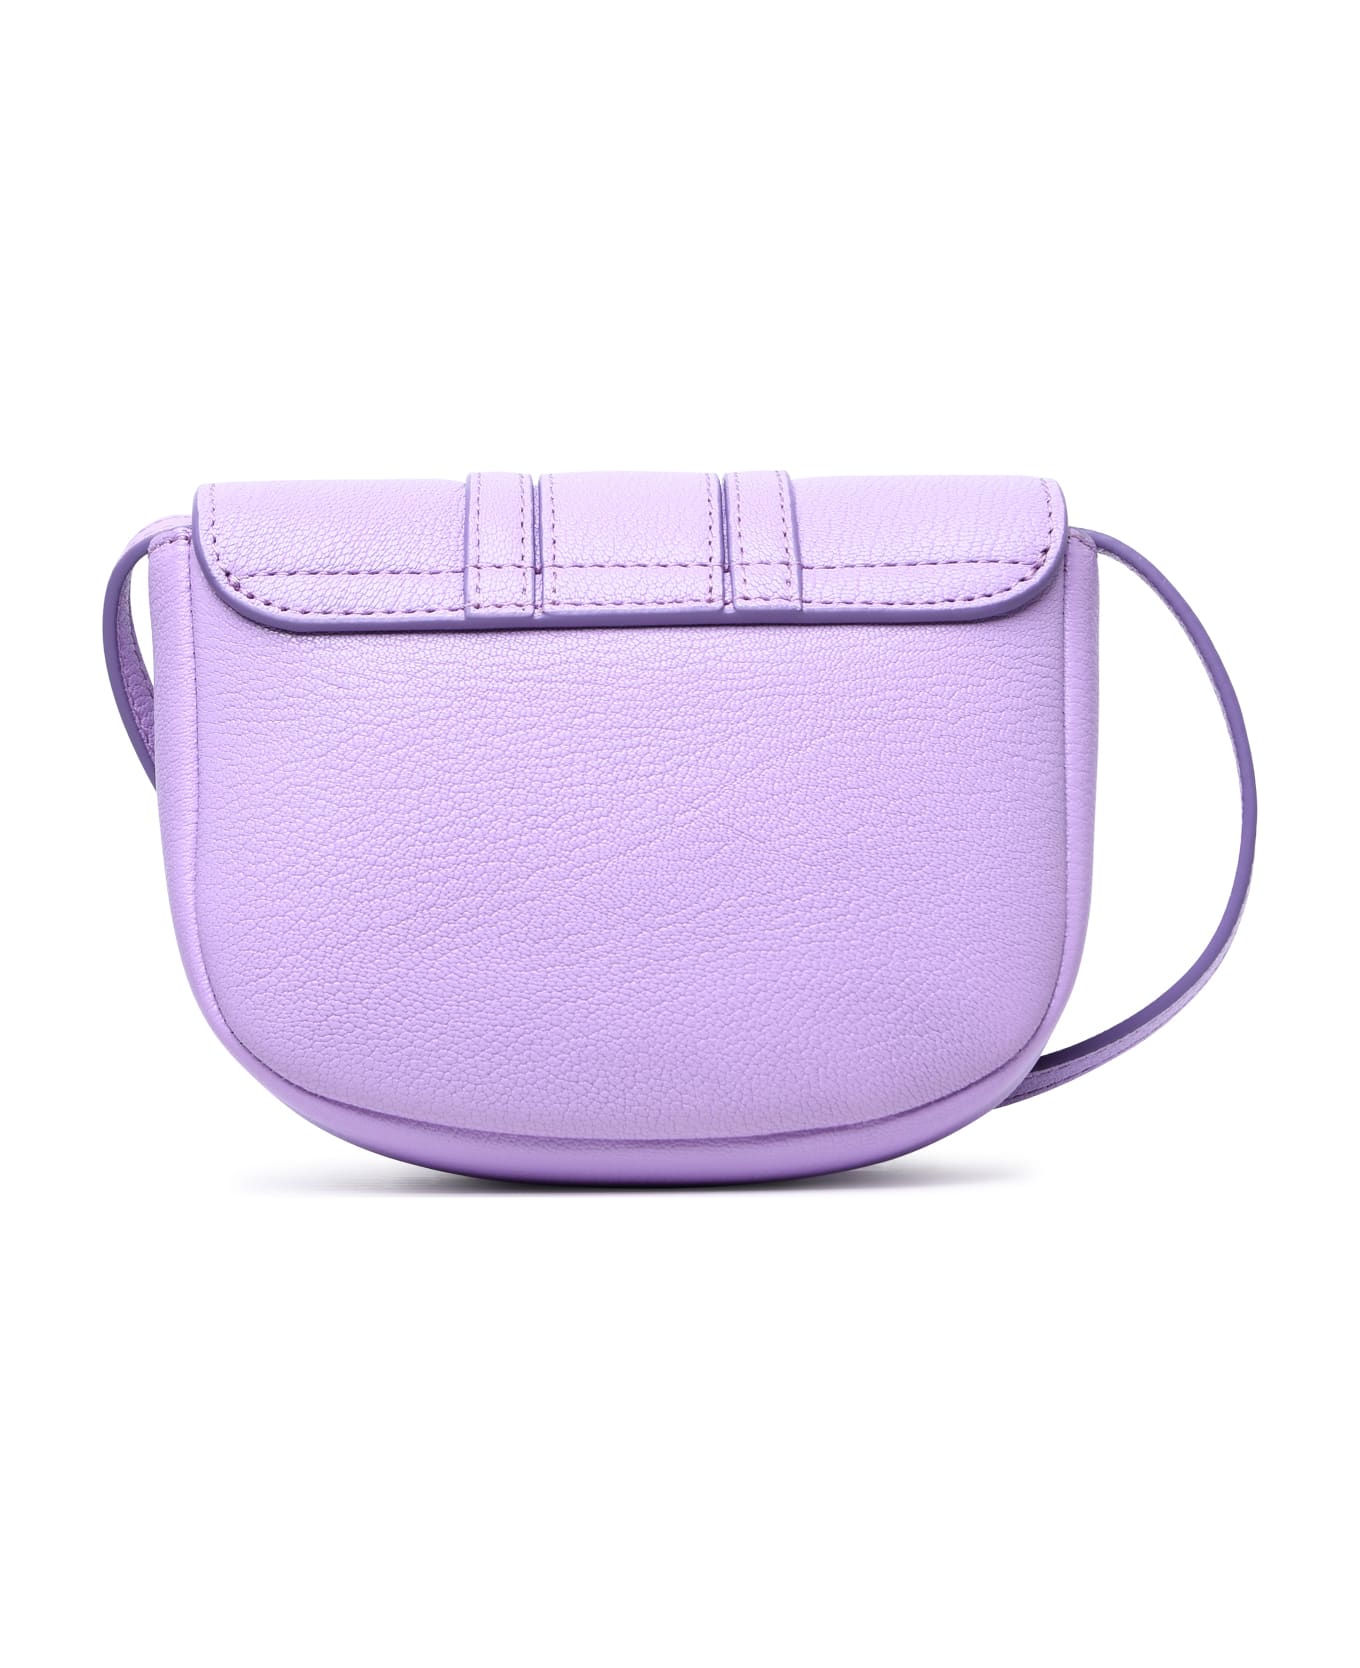 See by Chloé 'hana' Small Lilac Leather Bag - Liliac トートバッグ